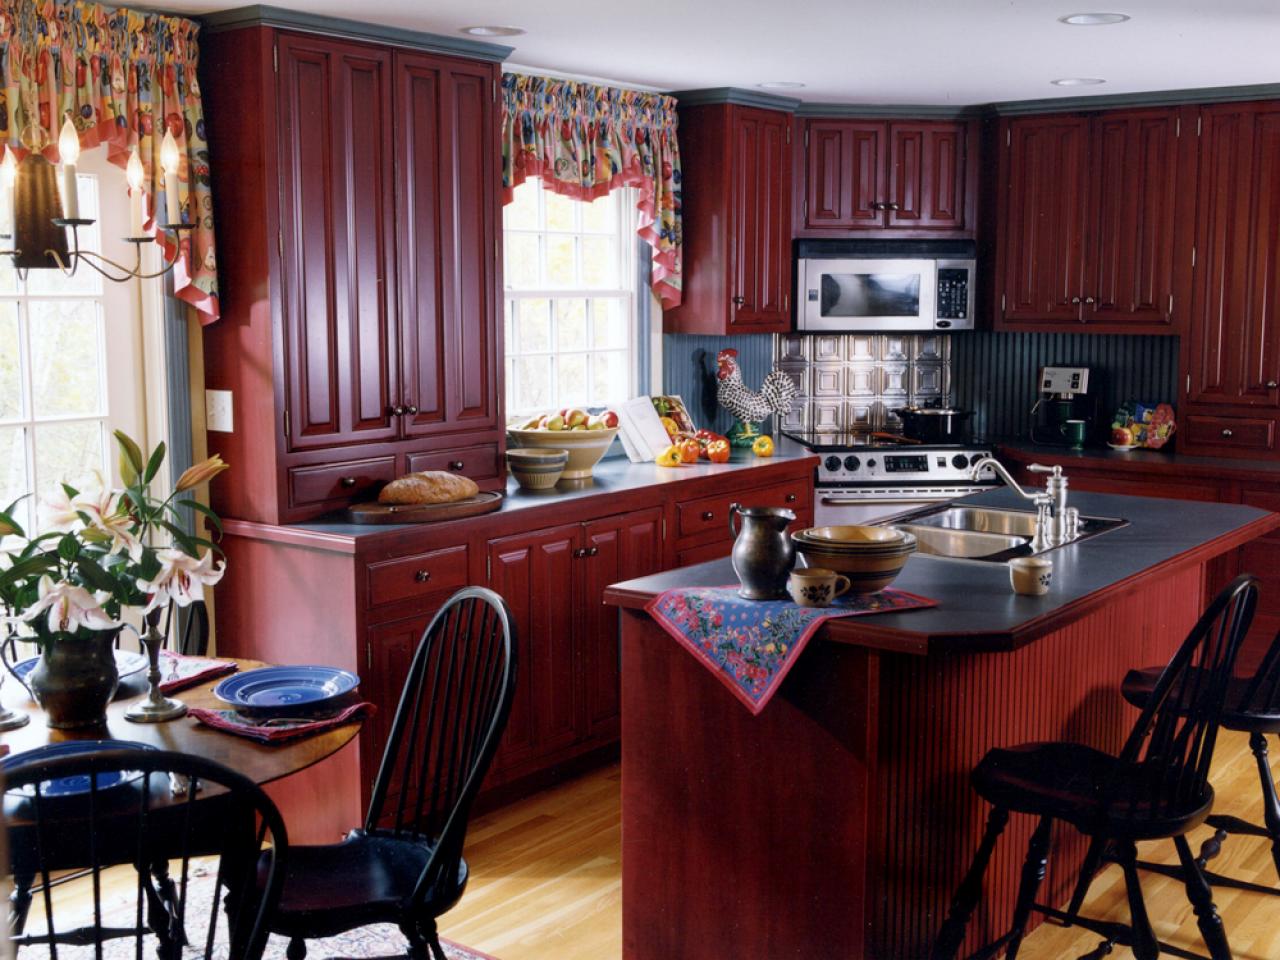 Guide to Creating a Country Kitchen   HGTV